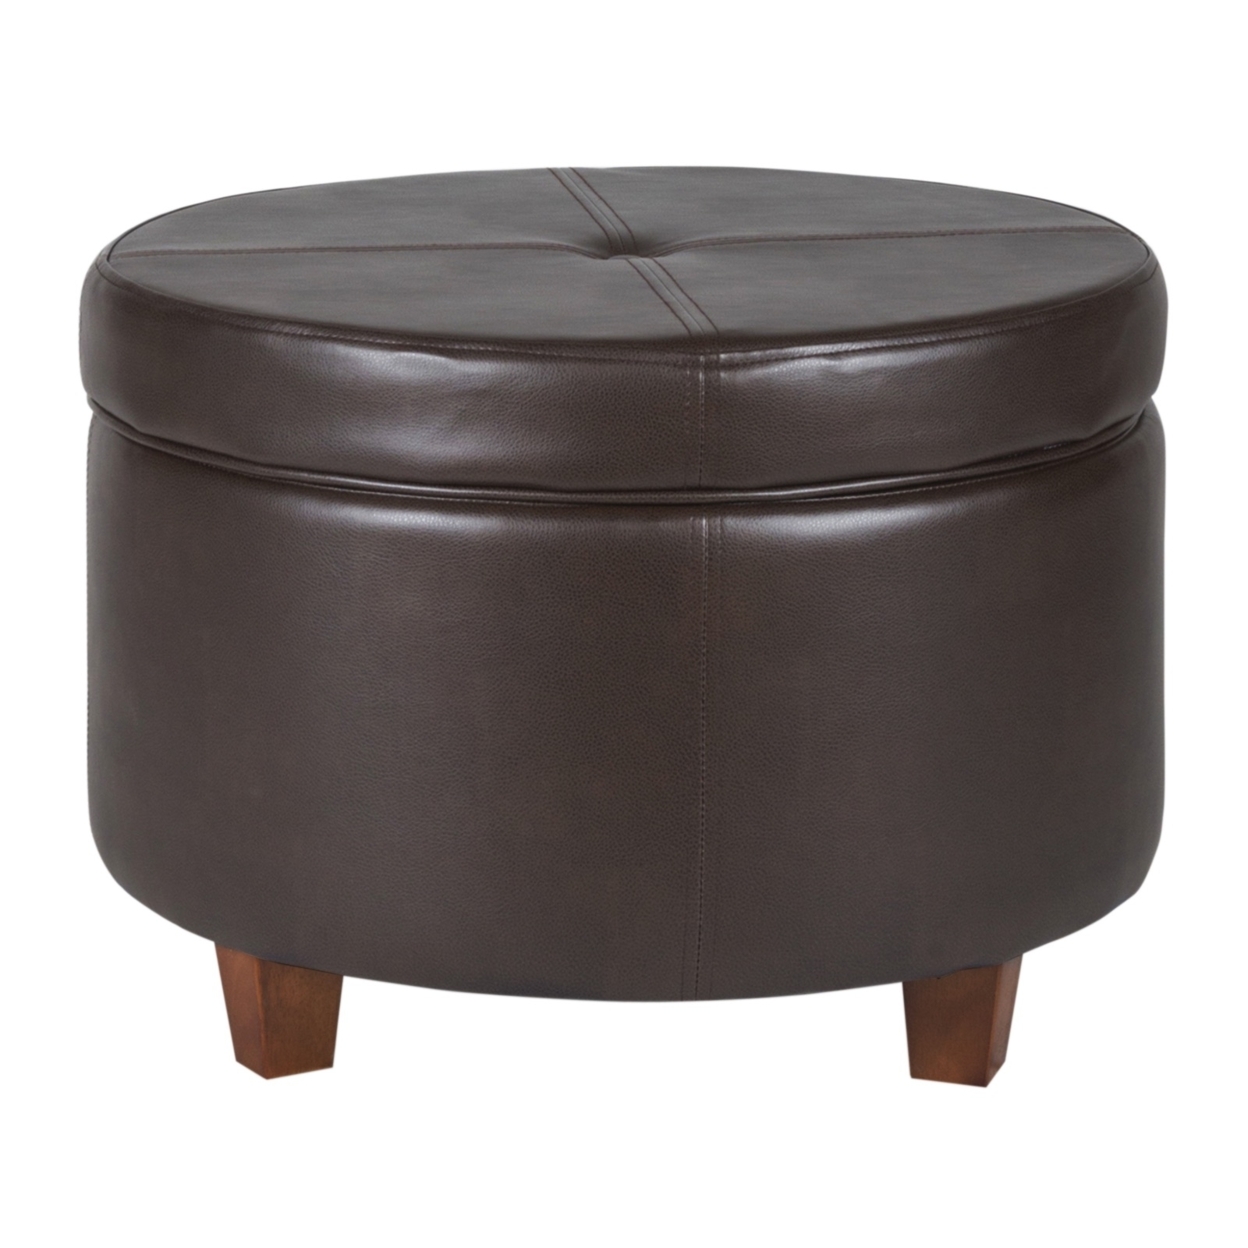 Leatherette Upholstered Wooden Ottoman With Single Button Tufted Lift Top Storage, Brown, Large- Saltoro Sherpi